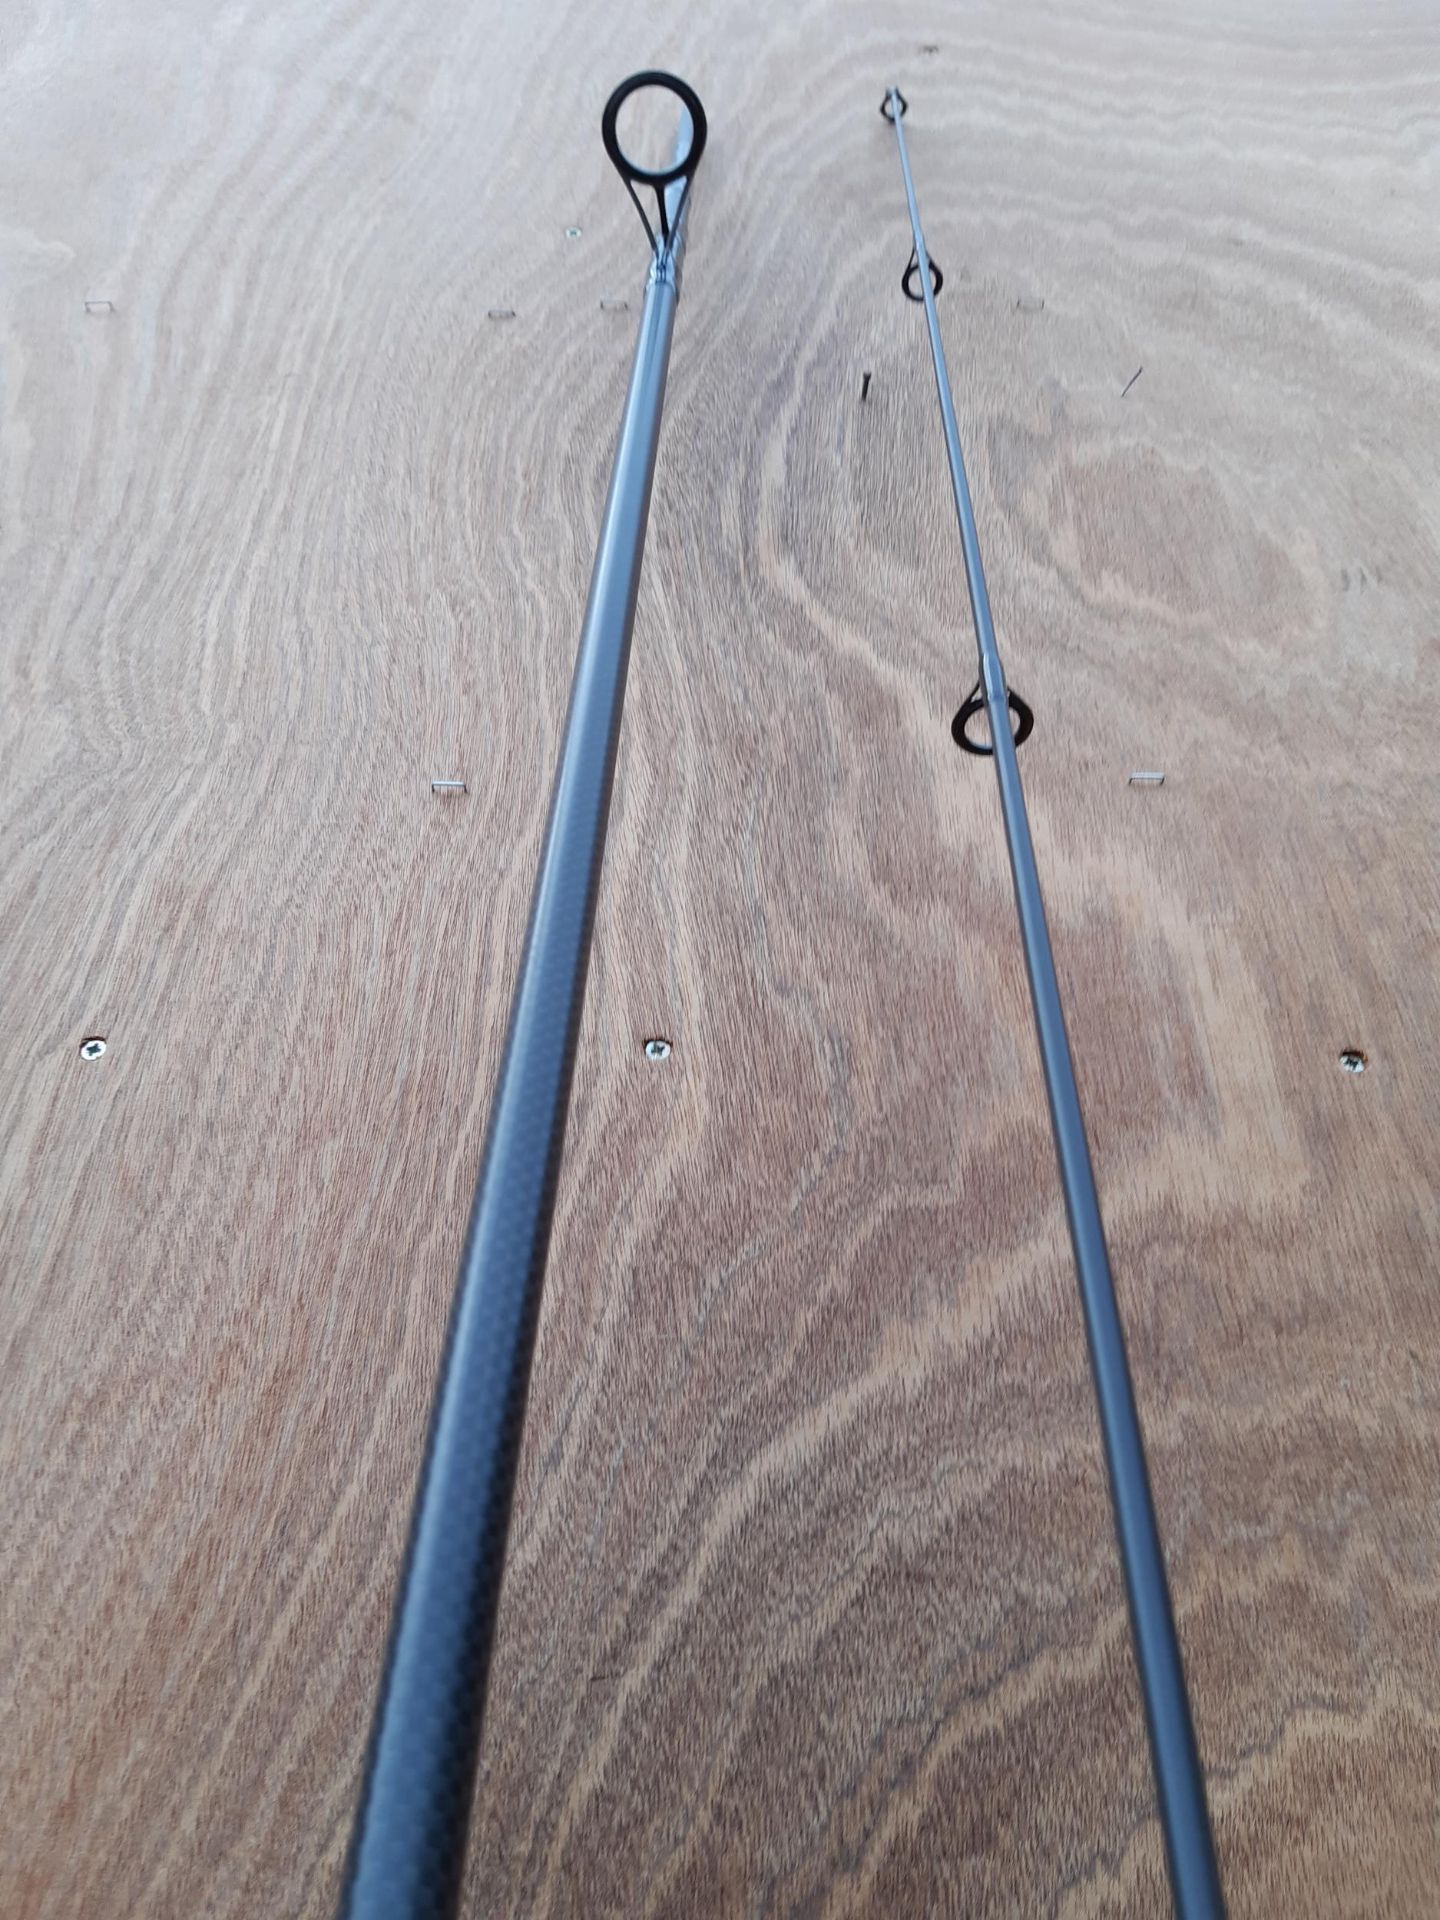 A 12FT 2.75LB GREYS PRODIGY CARP FISHING ROD. VENDOR STATES IT HAS ONLY BEEN USED TWICE - Image 8 of 8